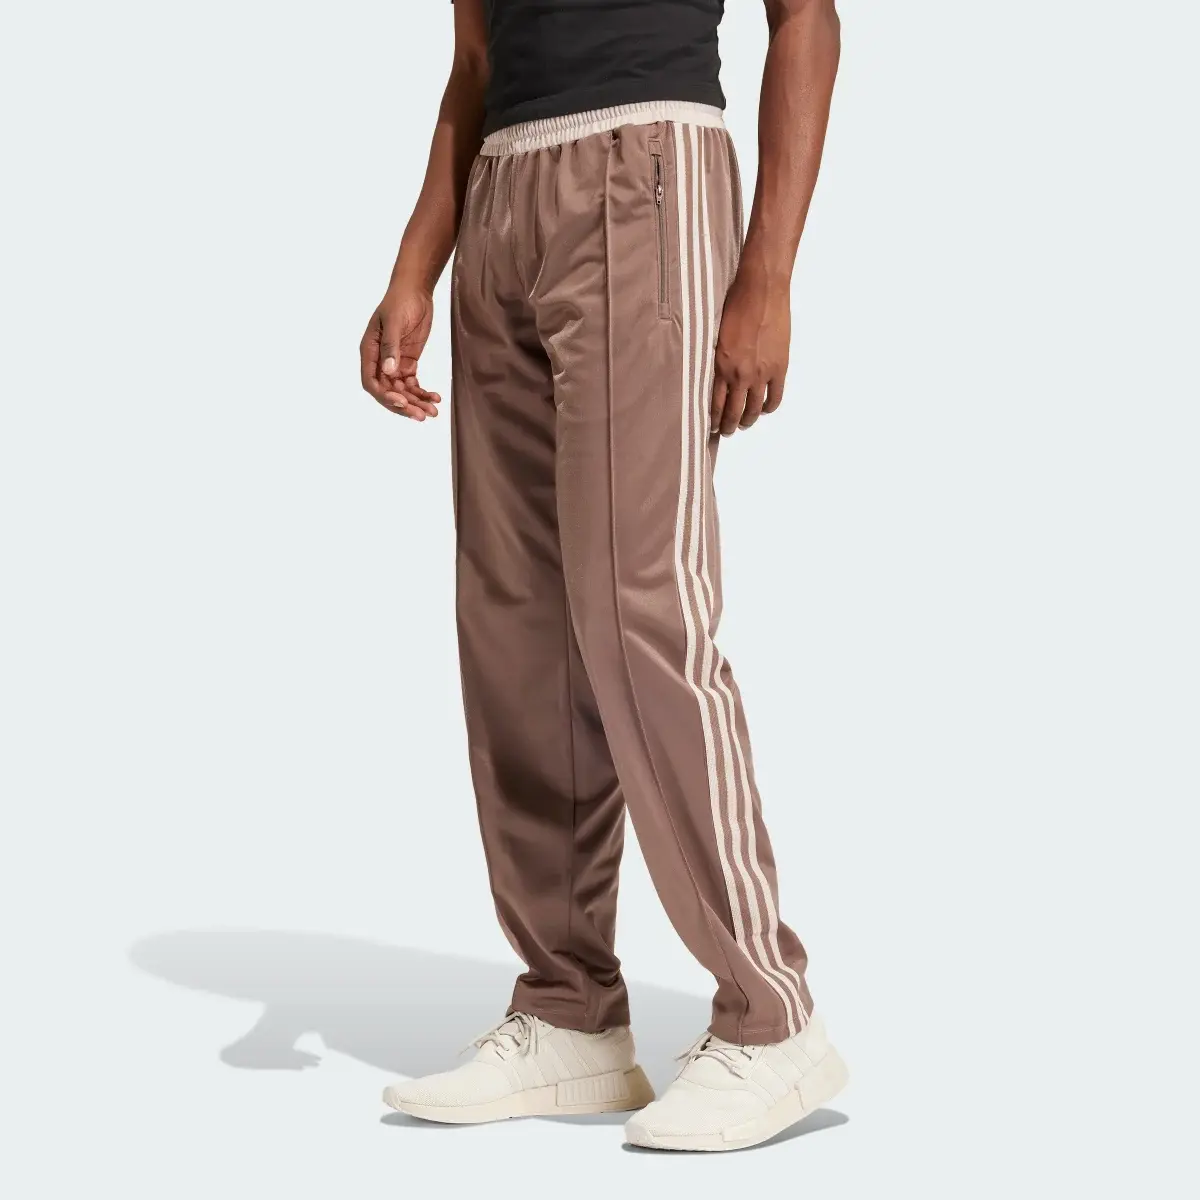 Adidas Track Tracksuit Bottoms. 2